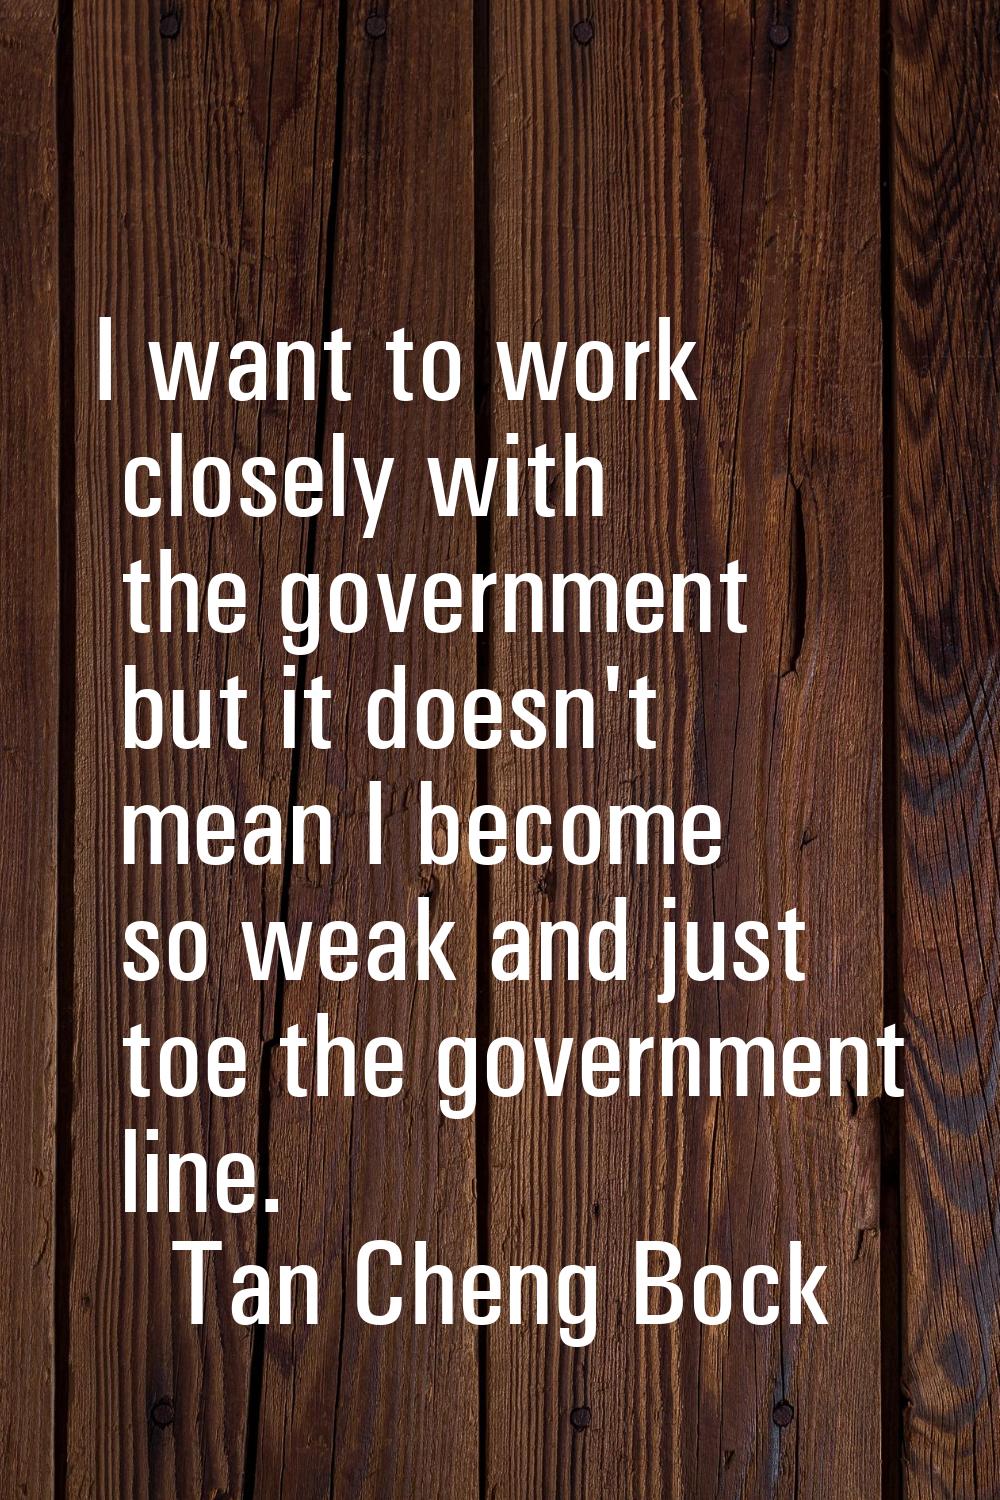 I want to work closely with the government but it doesn't mean I become so weak and just toe the go